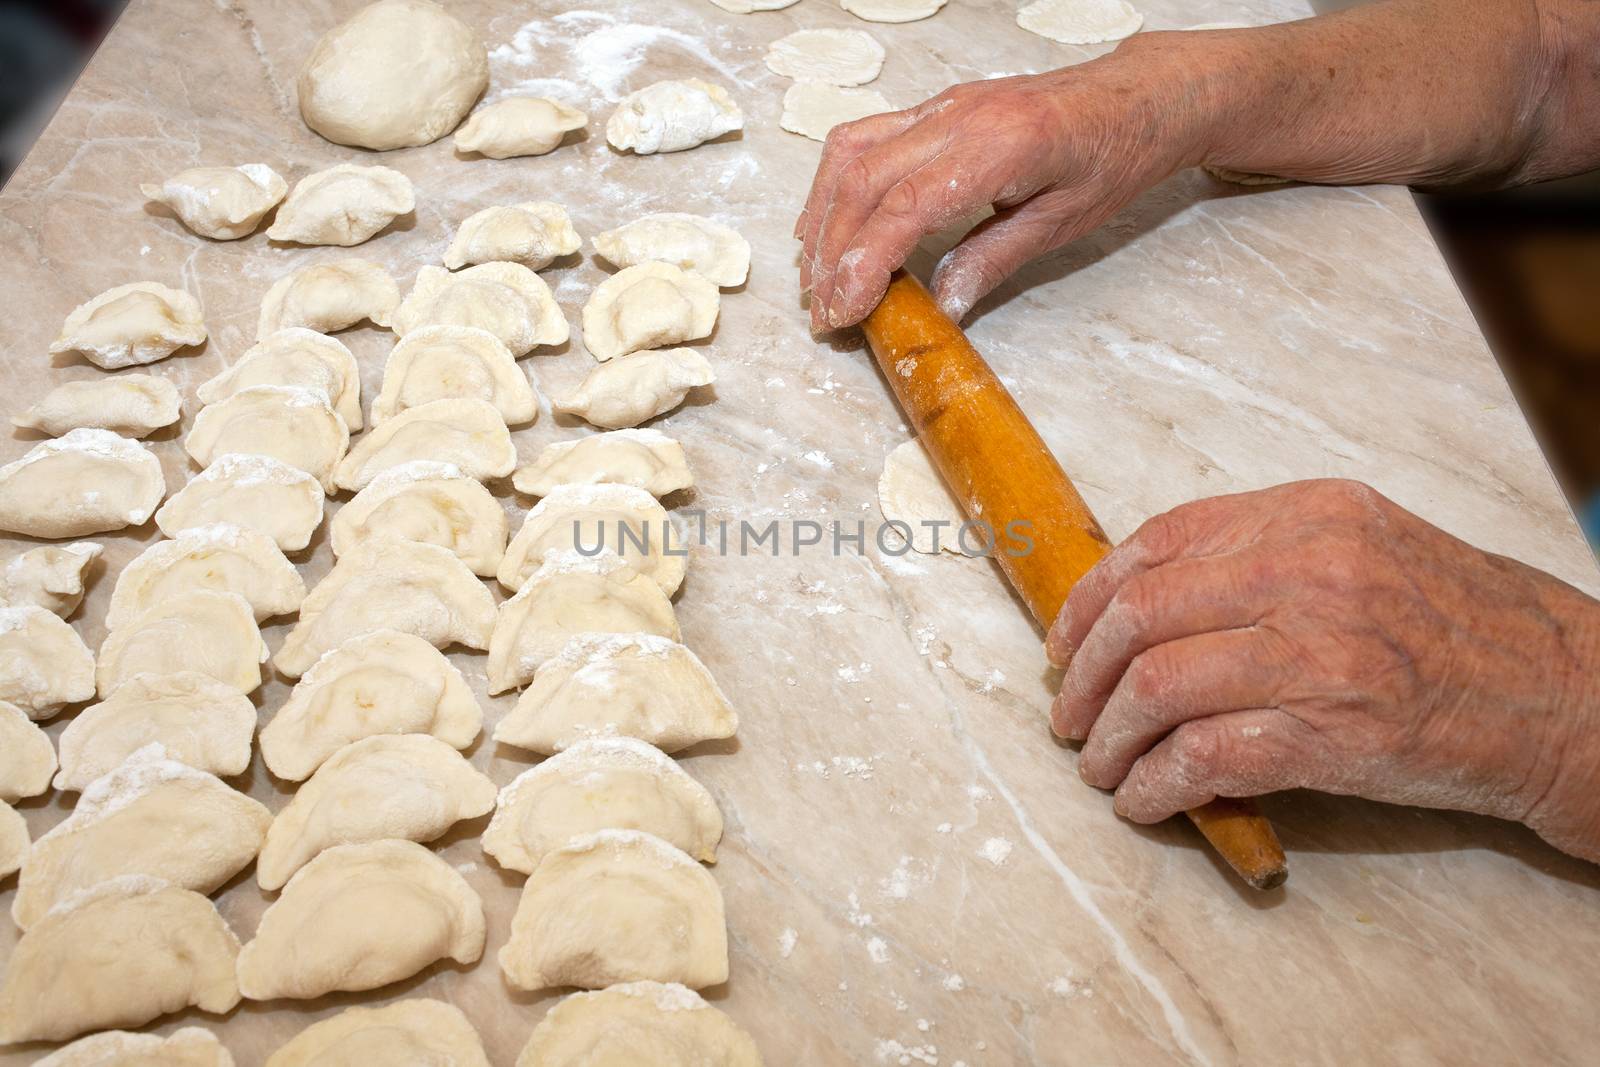 A fragment of the manufacturing process dumplings at home on the kitchen table